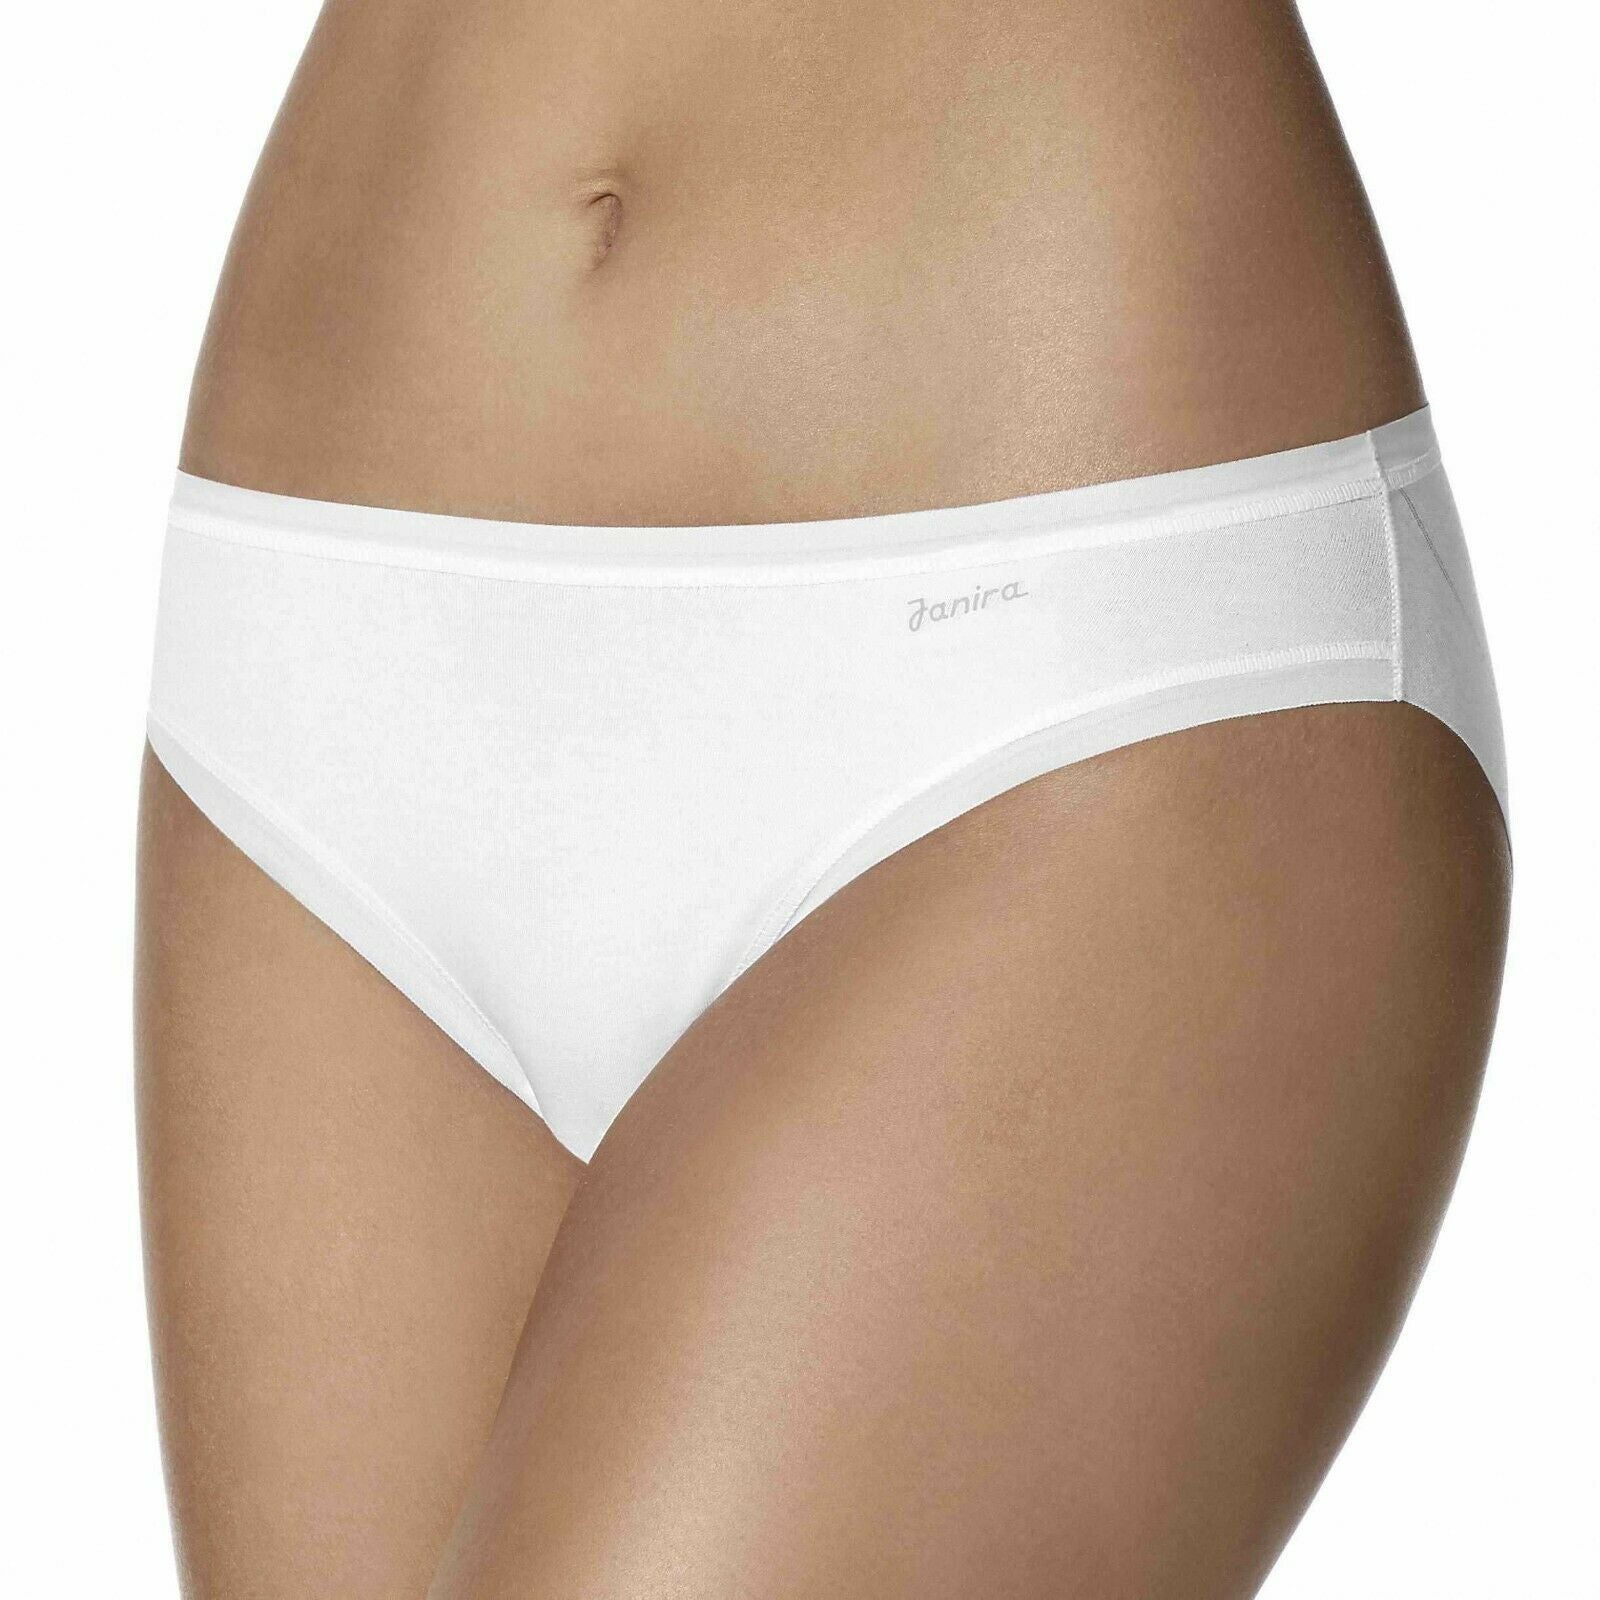 Janira Mini Cotton Band Knickers In Black or Nude or White - NO